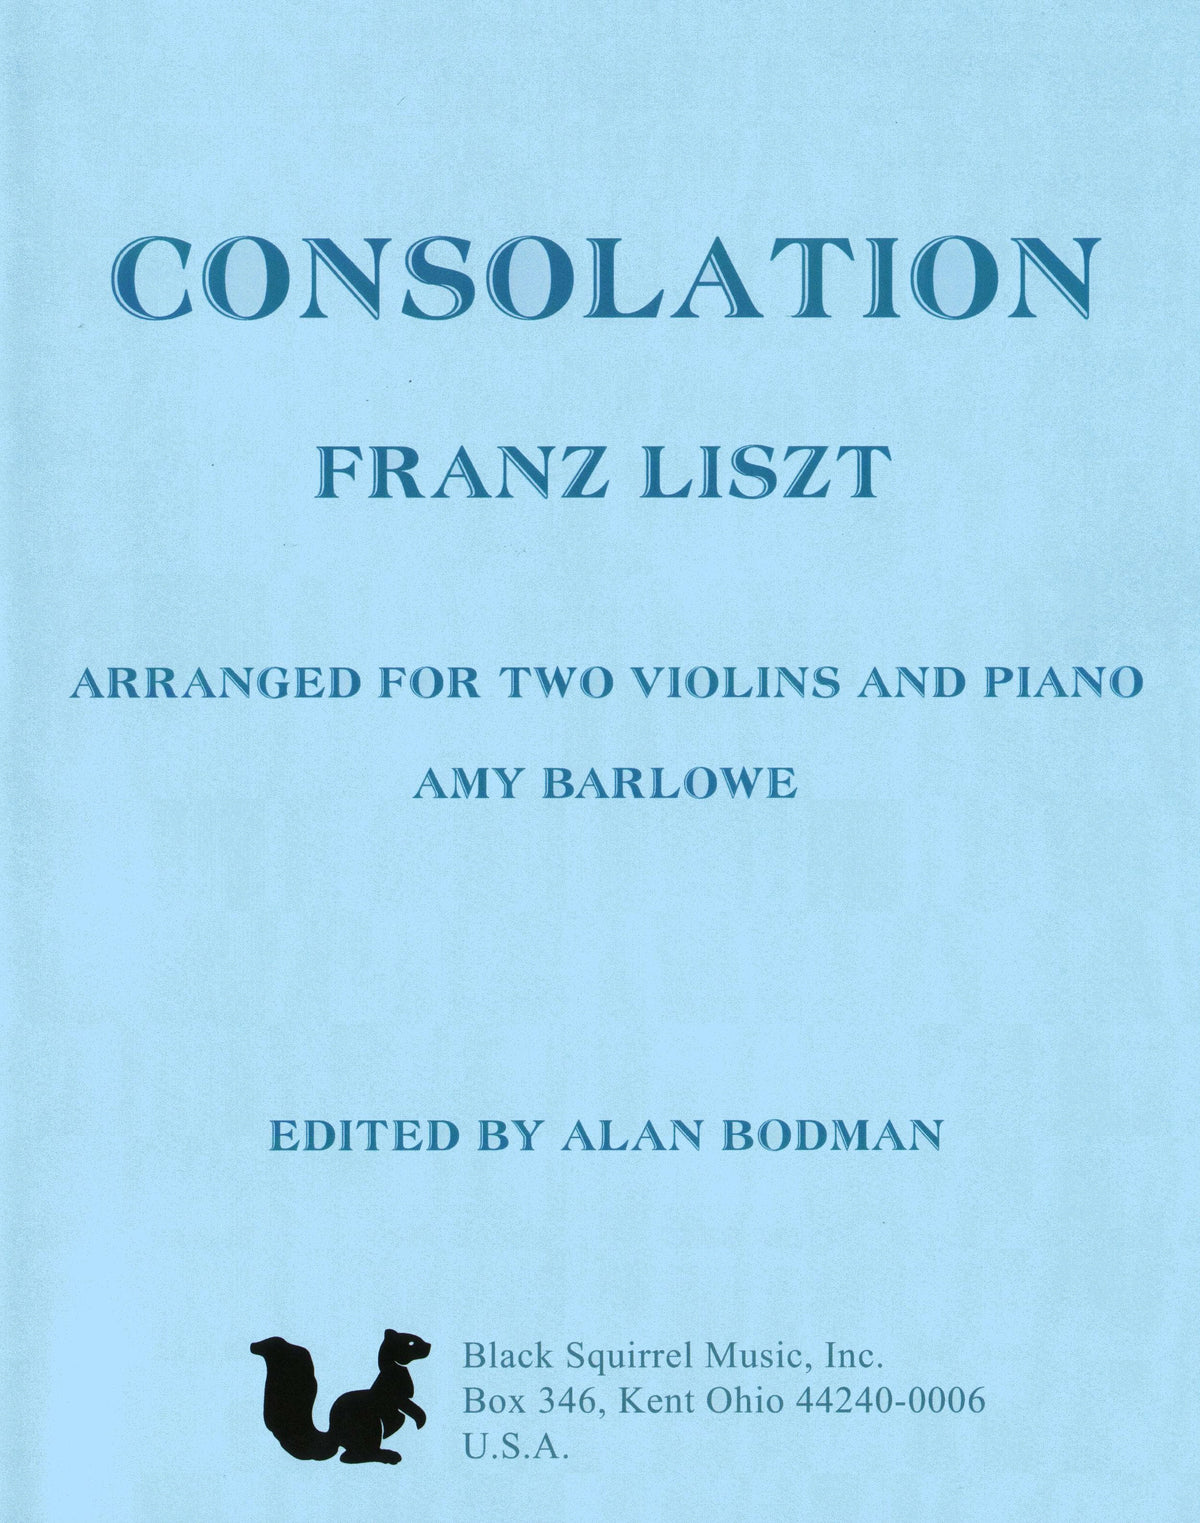 Liszt, Franz - Consolation - Two Violins and Piano - arranged by Amy Barlowe, edited by Alan Bodman - Black Squirrel Music